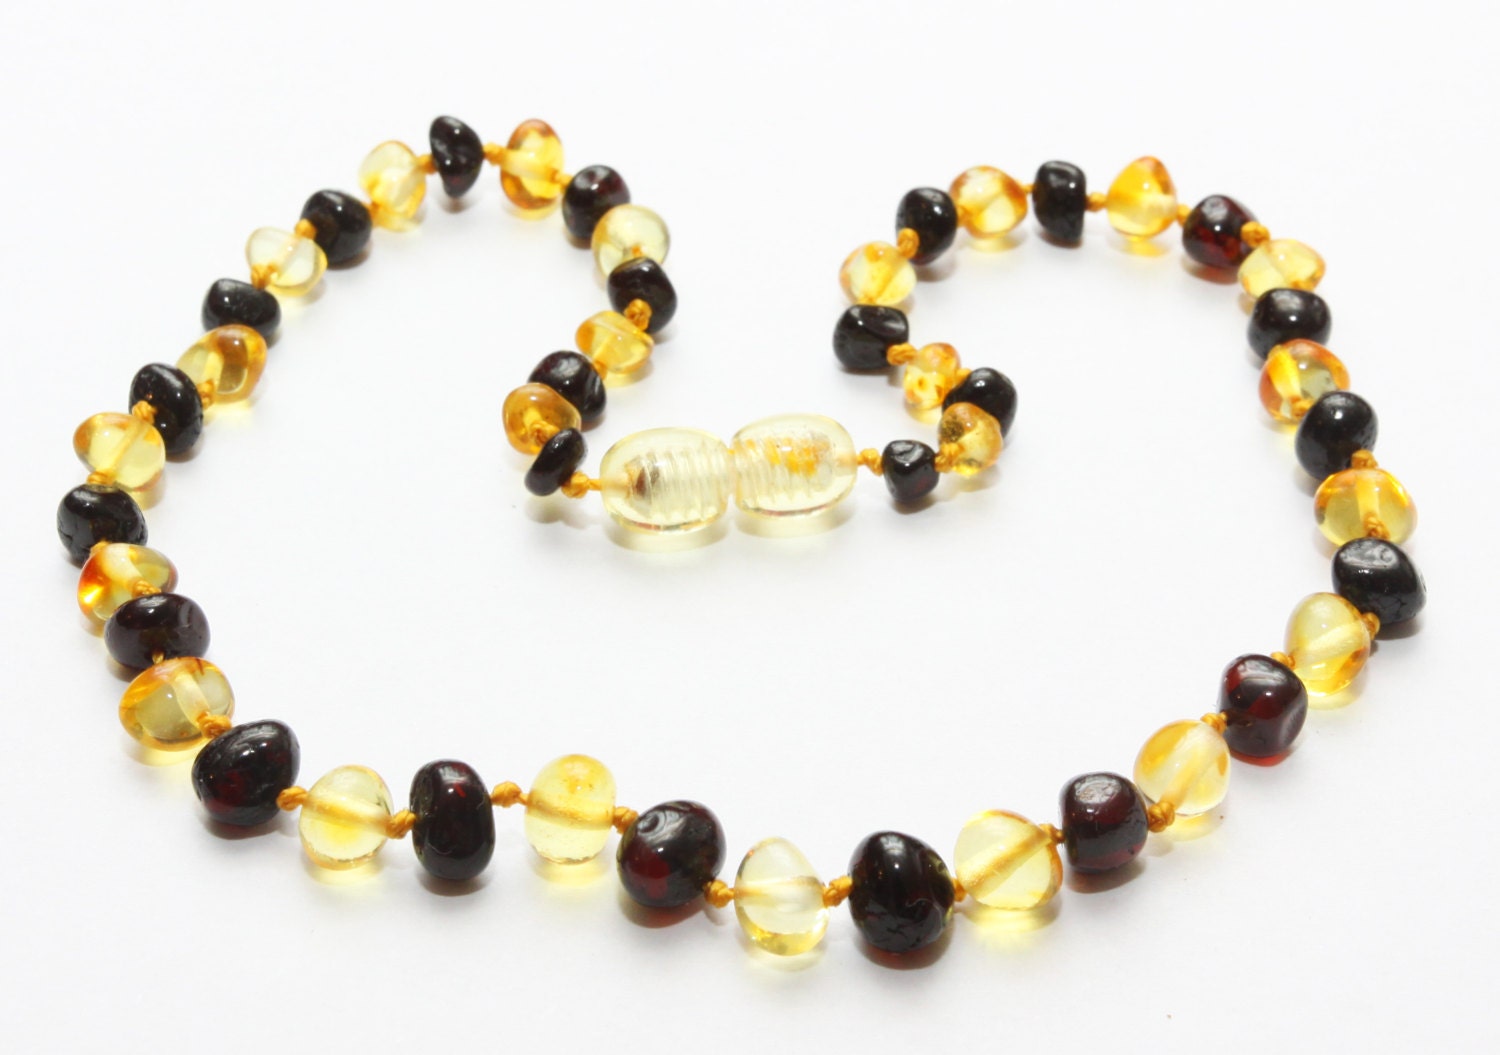 Authentic baltic amber baby teething necklace. 32-34